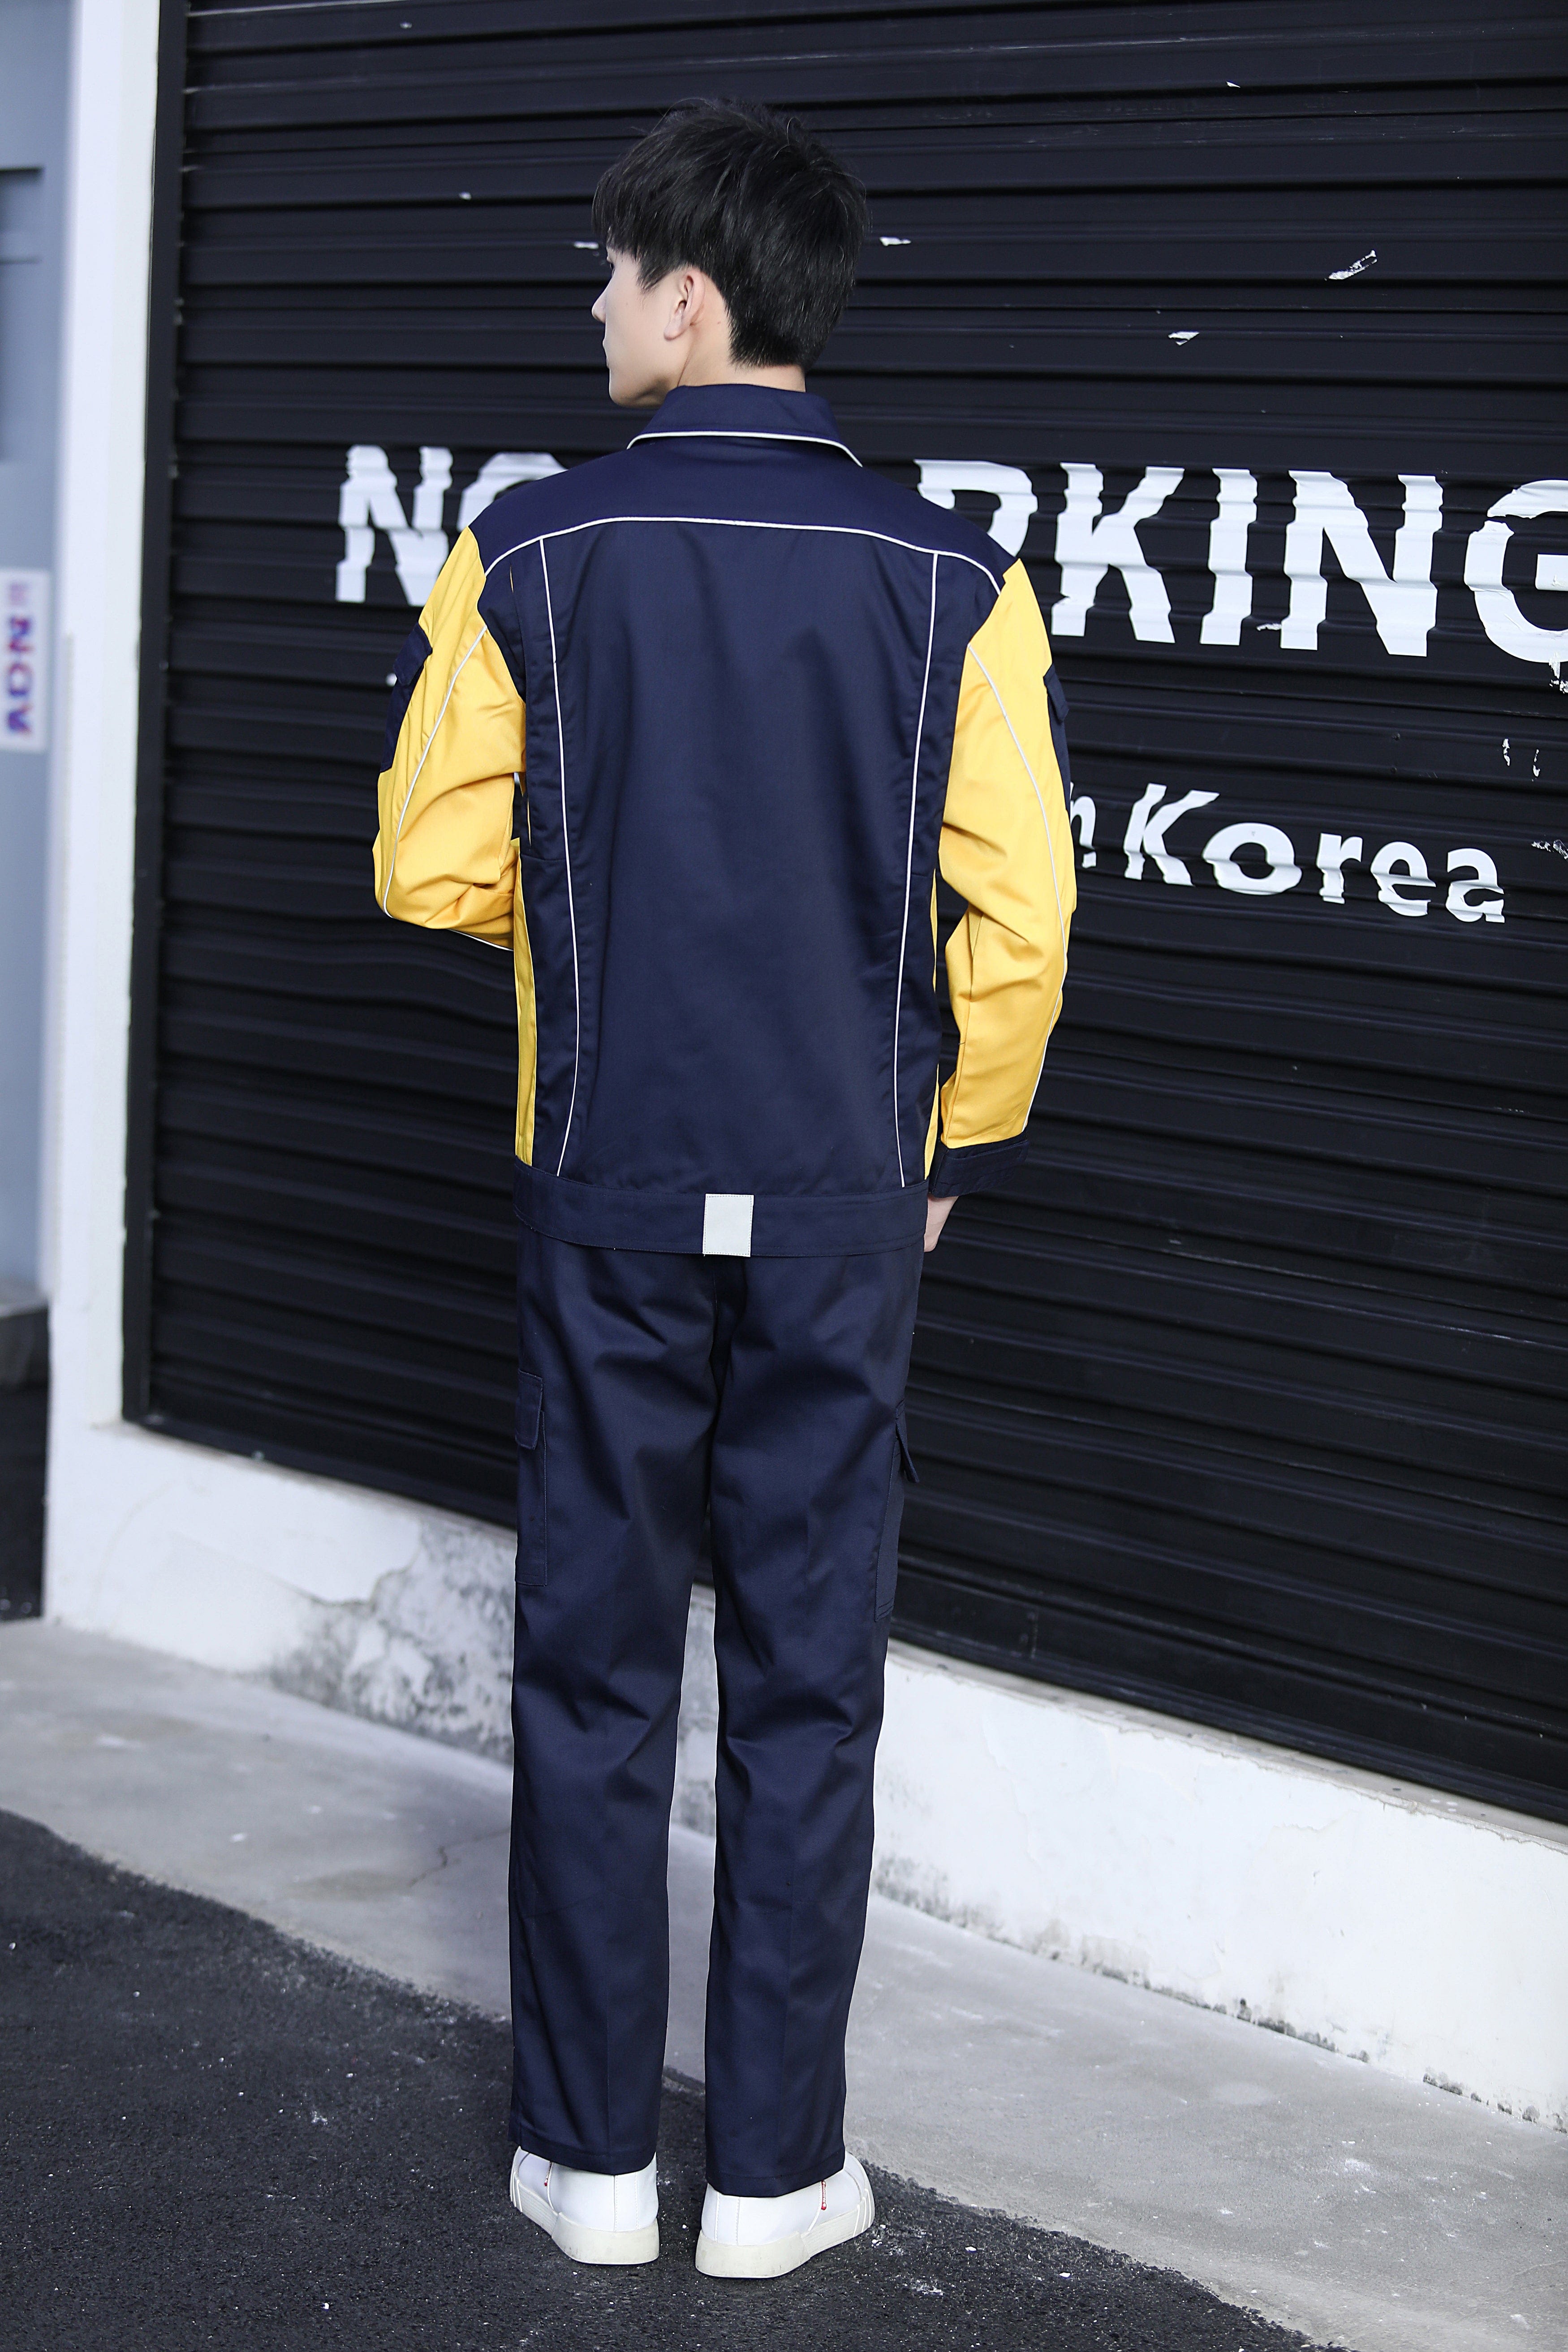 Corals Trading Co. 可樂思百貨商行 涤棉 Spring and Autumn Long Sleeve Polyester-Cotton Workwear SD-W203